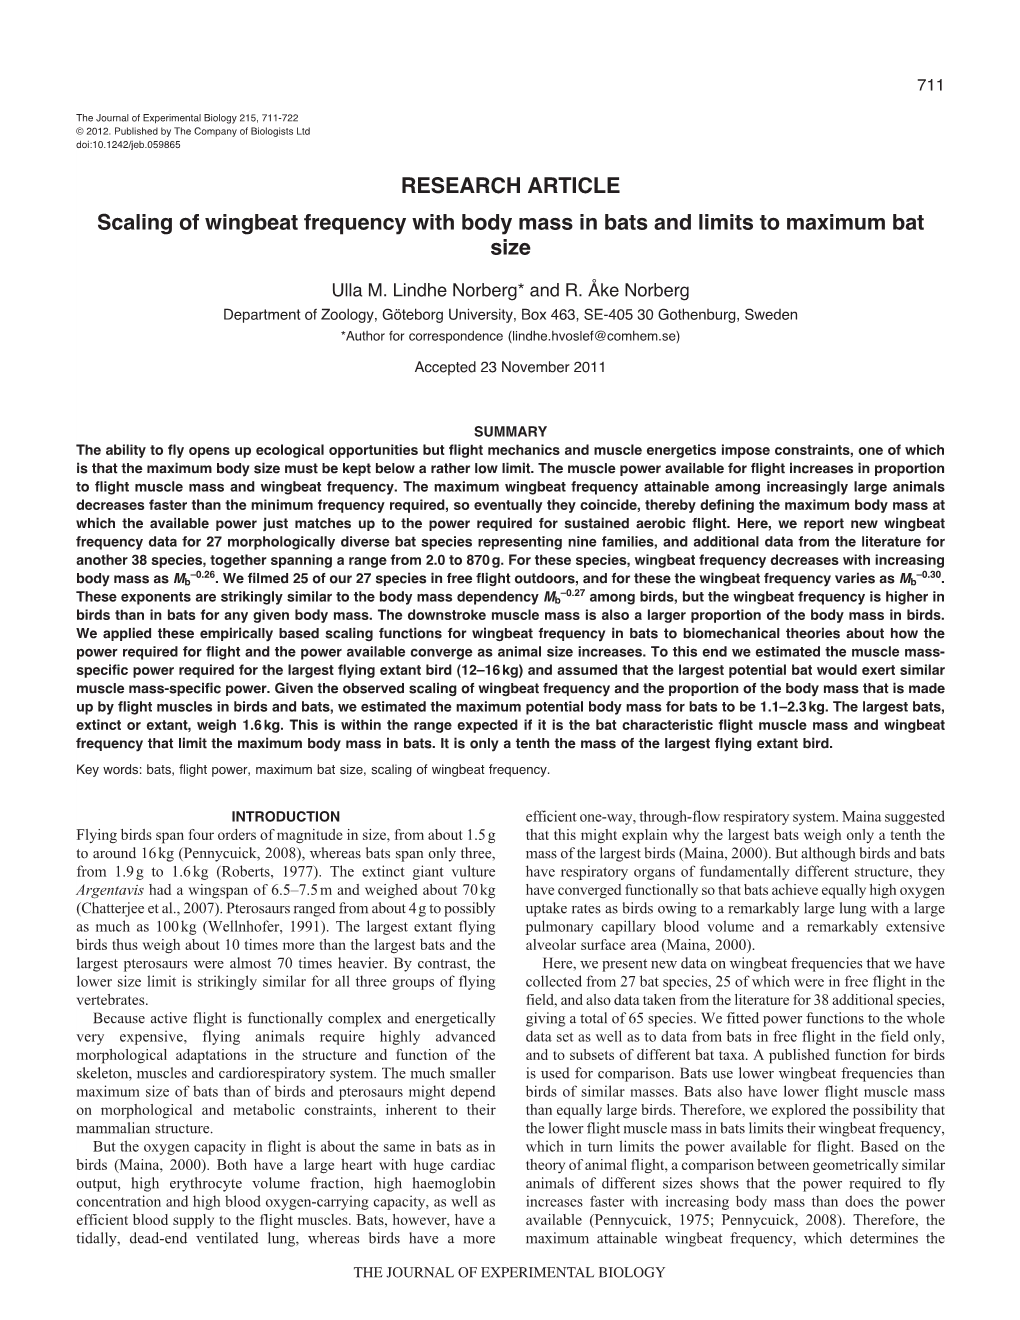 Sacling of Wingbeat Frequency with Body Mass in Bats and Limits To